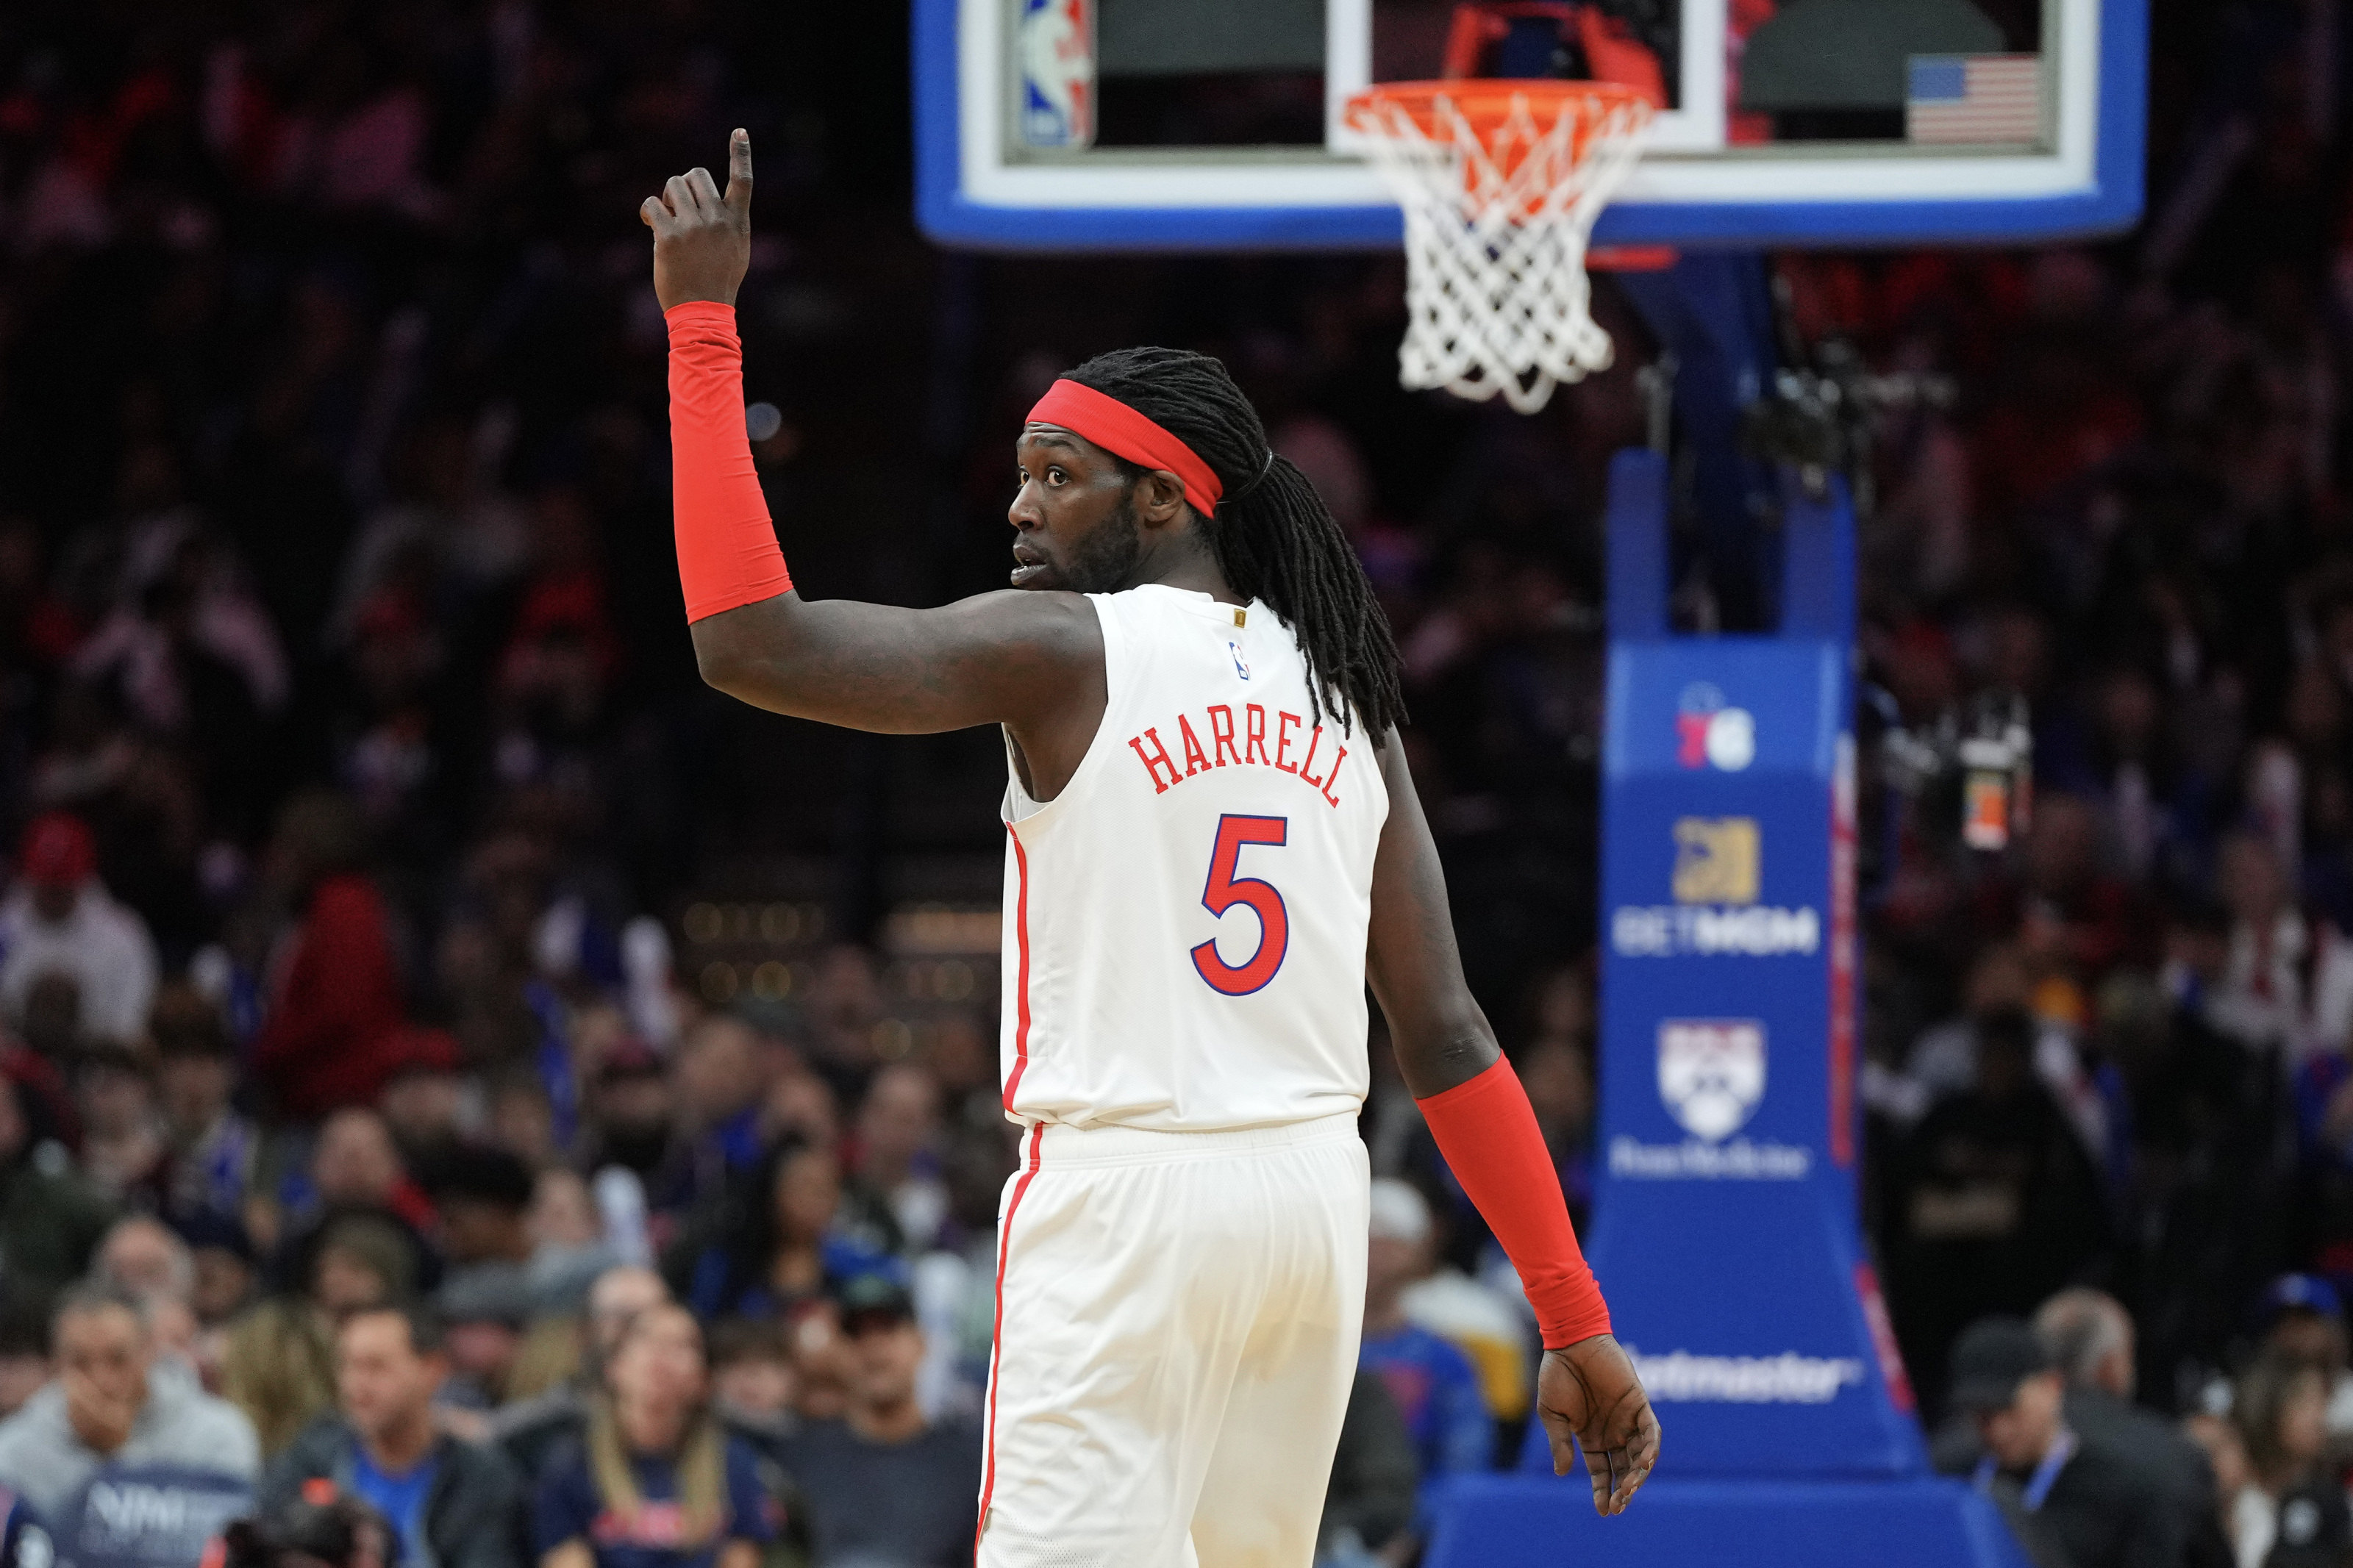 Sports Illustrated on X: With Montrezl Harrell opting into his